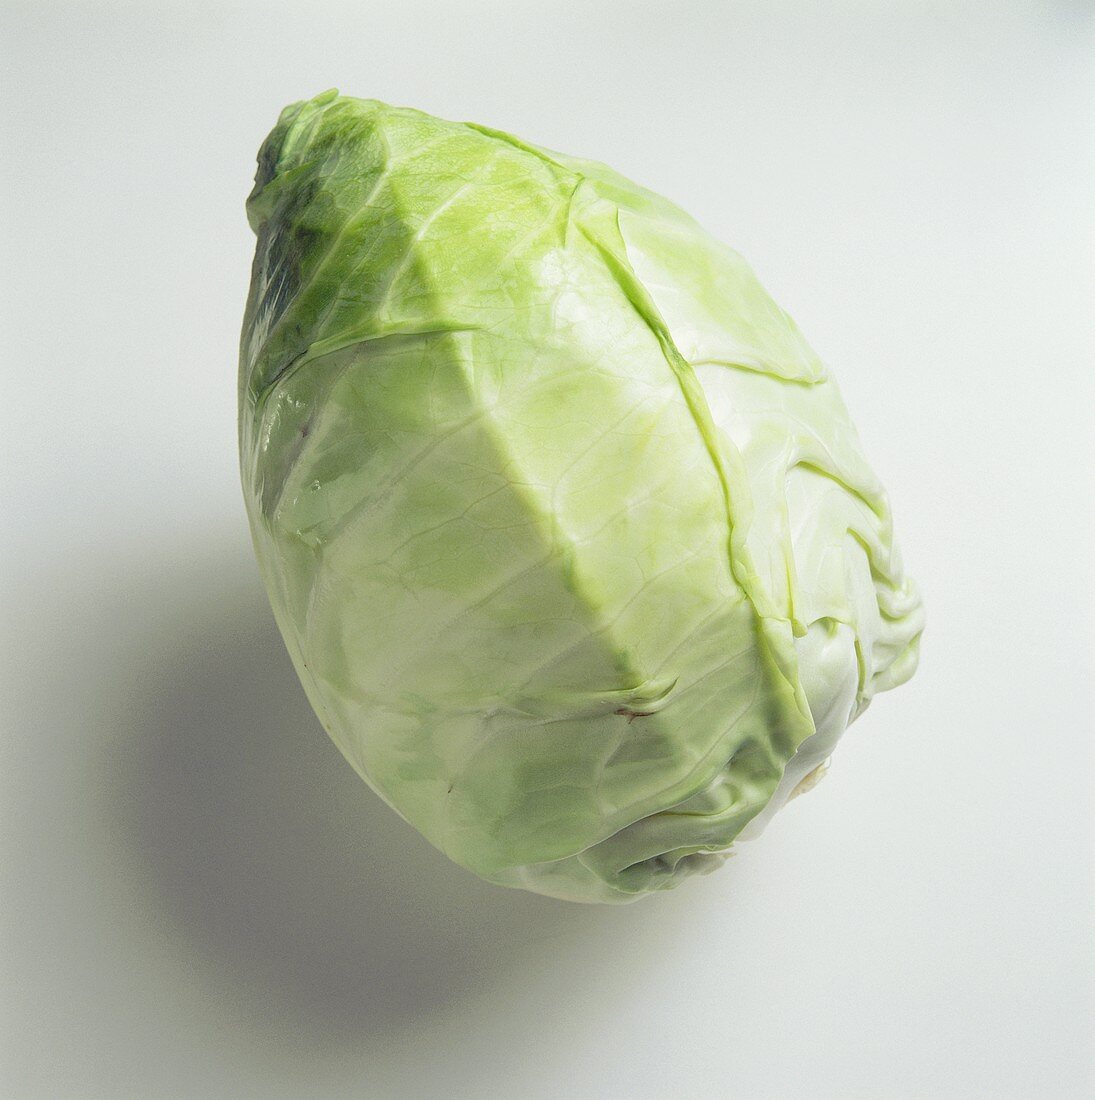 A Head of White Cabbage